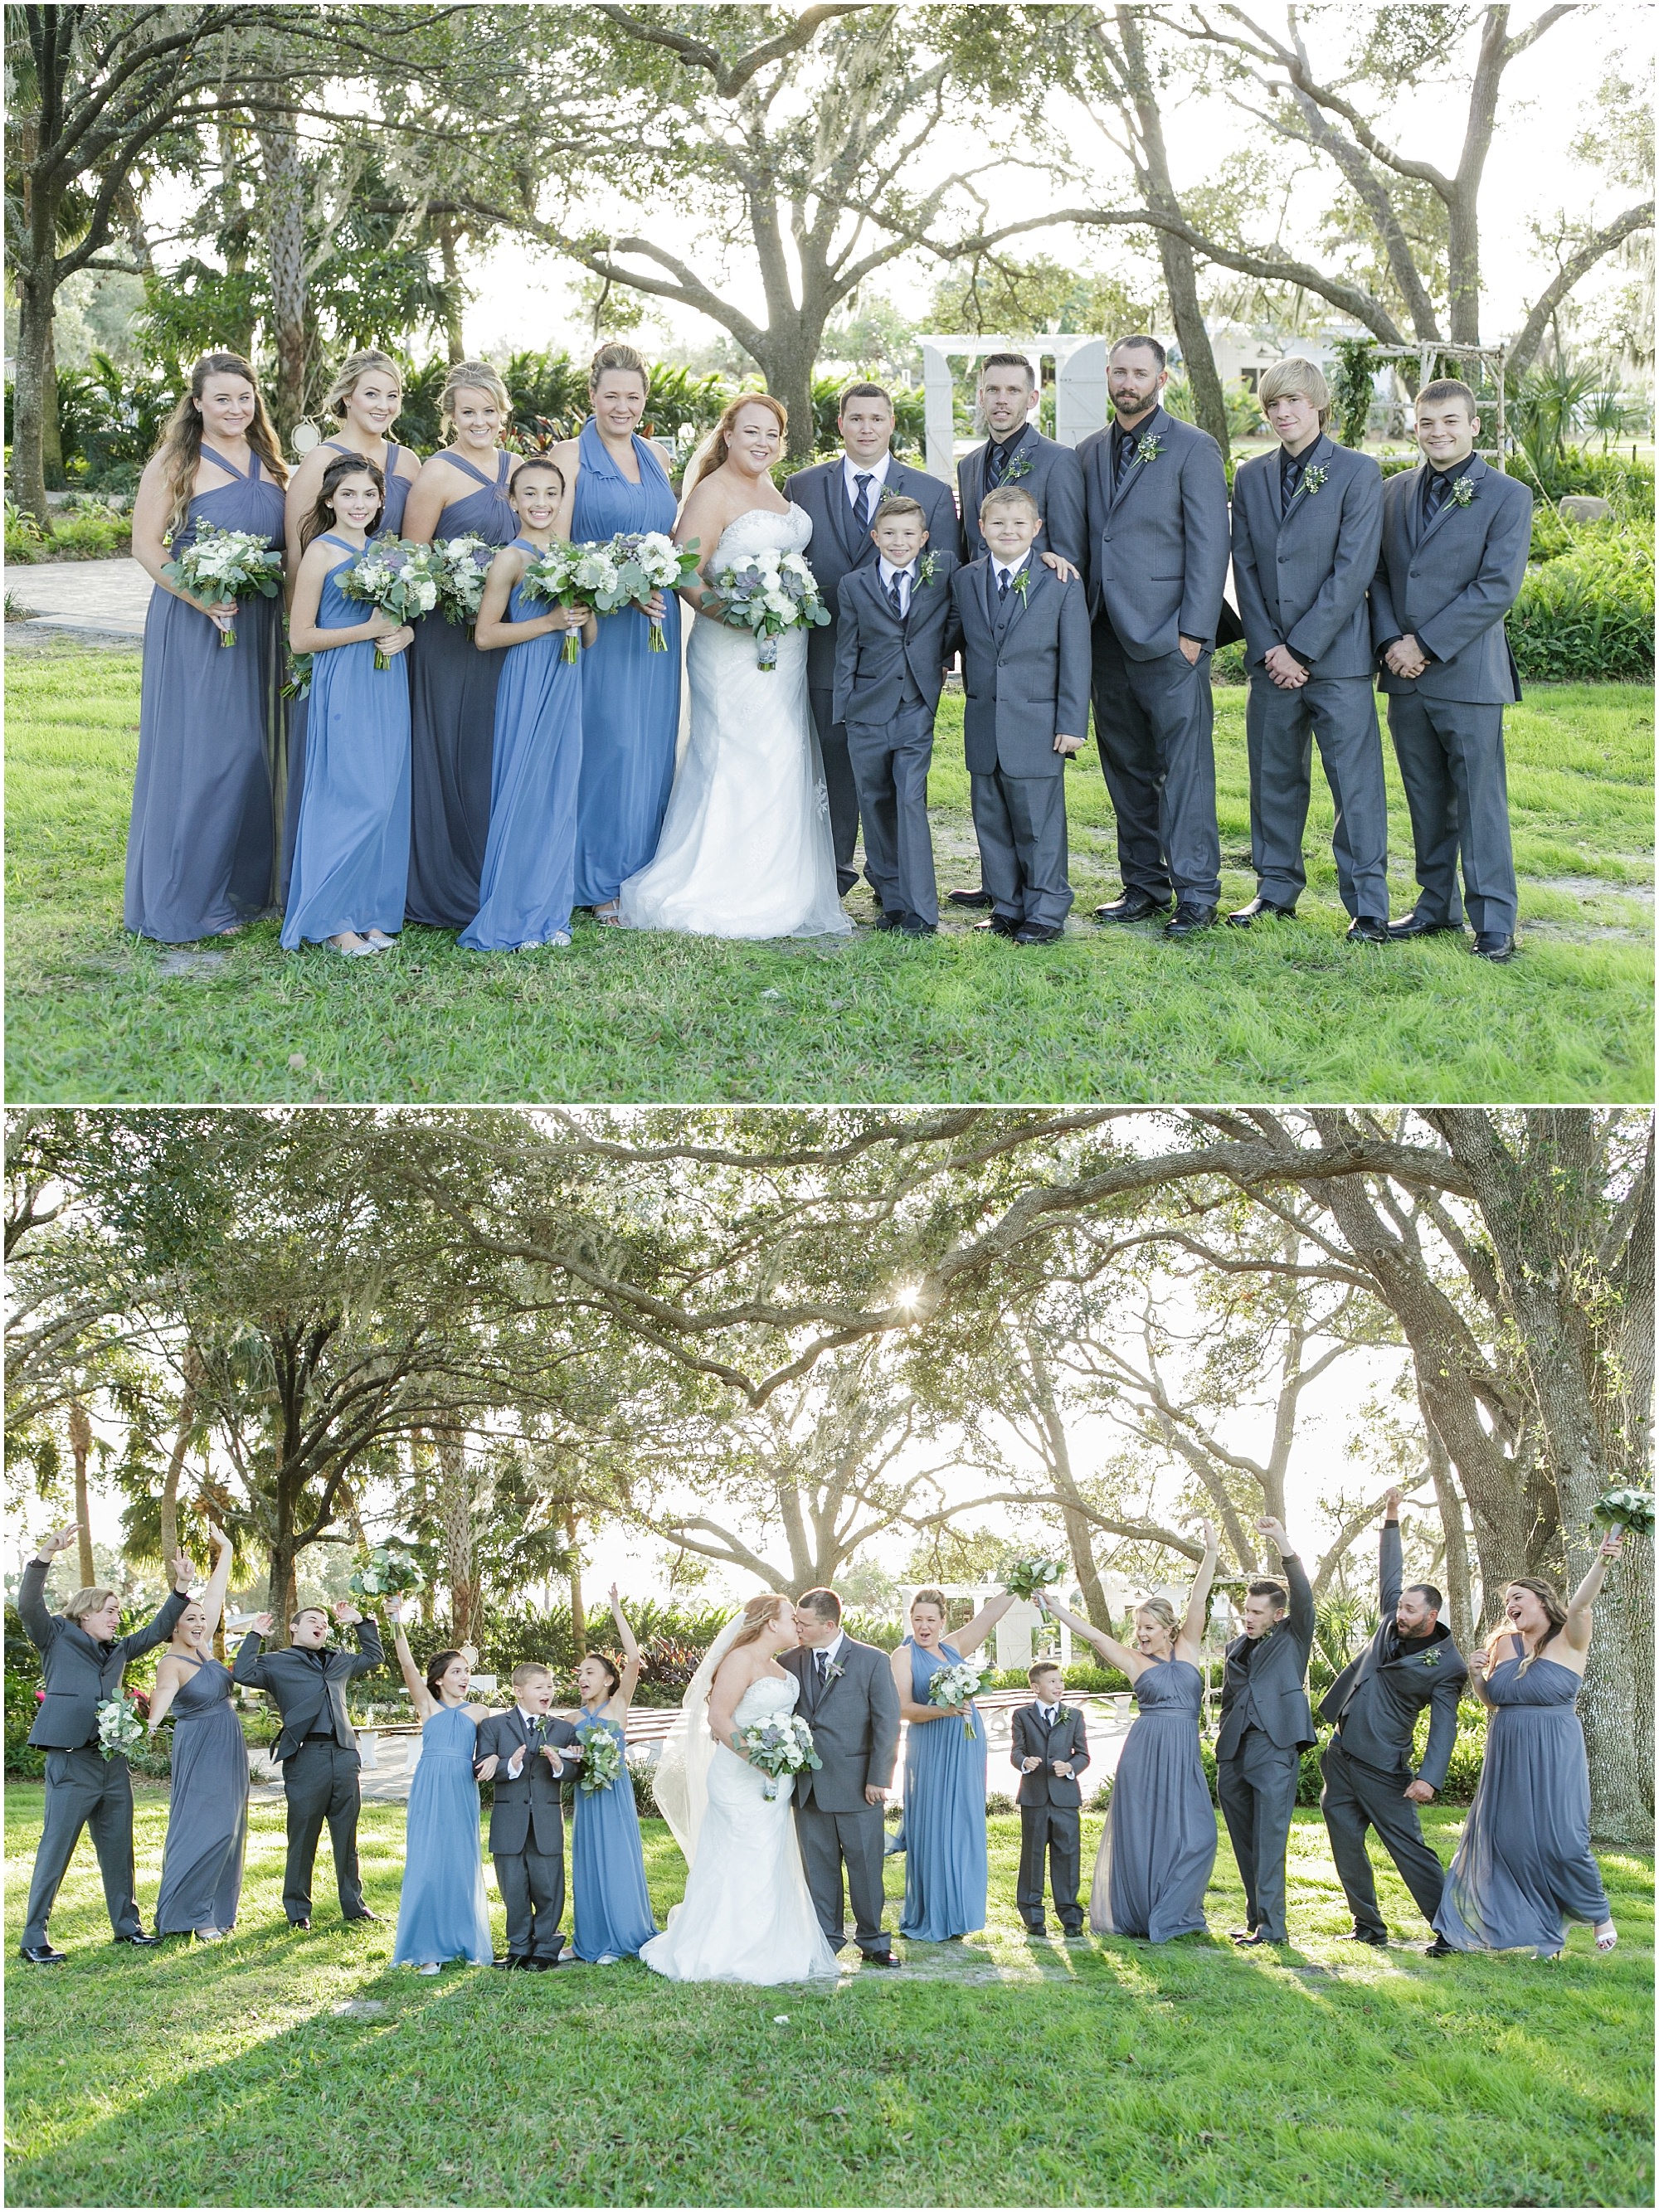 The entire wedding party posing together for photos under large oak trees